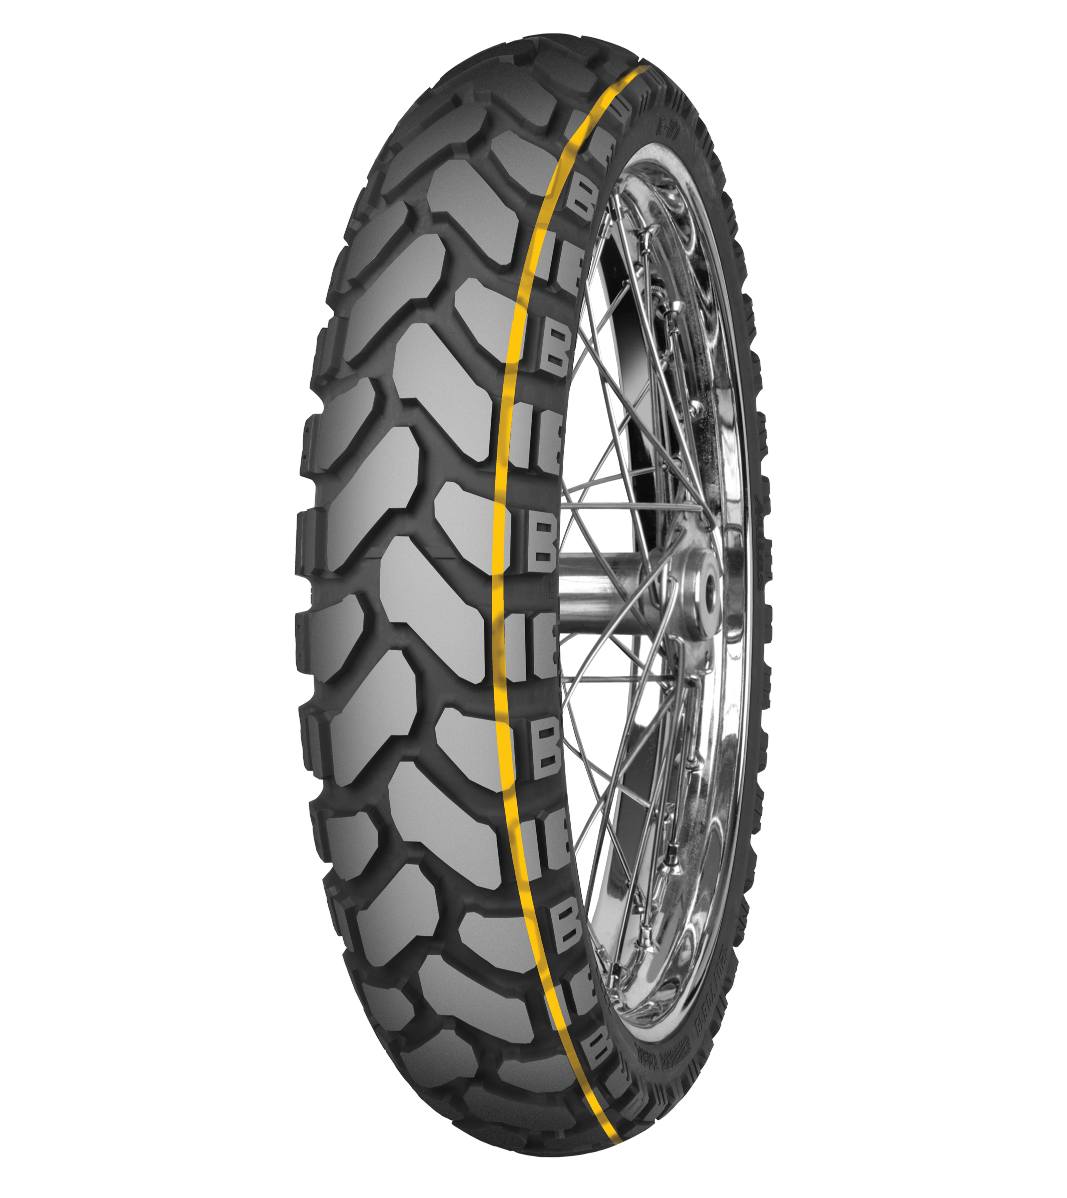 Mitas E-07+ ENDURO TRAIL 120/70B19 Trail ON Trail DAKAR 60T Yellow Tubeless Front Tire, 224142, 120/70B19, Adventure Touring, E Series, E-07+ Enduro Trail, Front, Trail, Trail ON, Tires - Imported and distributed in North & South America by Lindeco Genuine Powersports - Premier Powersports Equipment and Accessories for Motorcycle Enthusiasts, Professional Riders and Dealers.